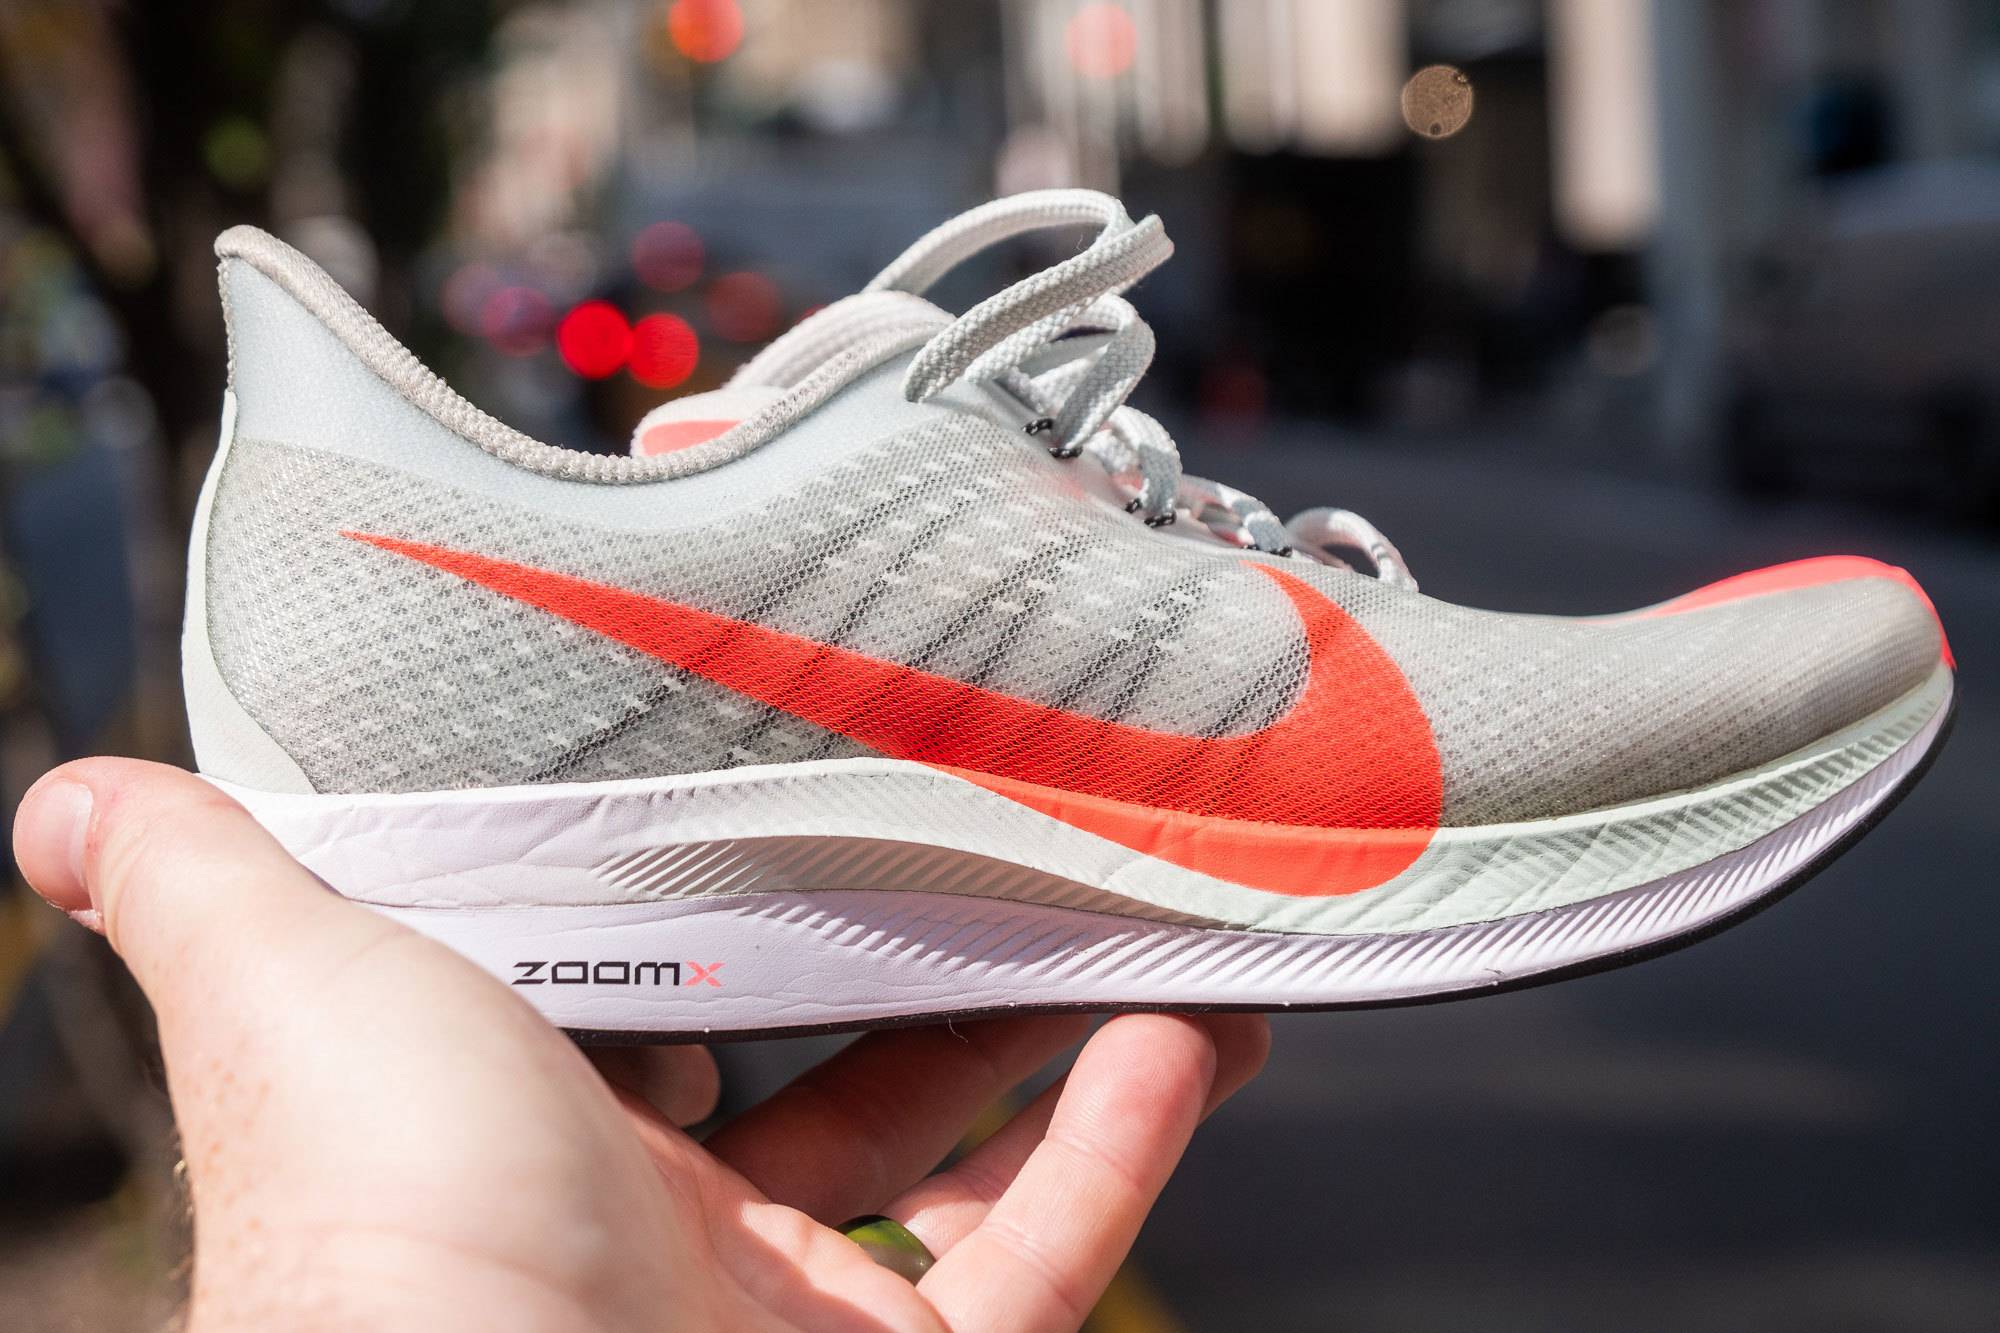 Nike put its energy-returning foam into a shoe you can train in